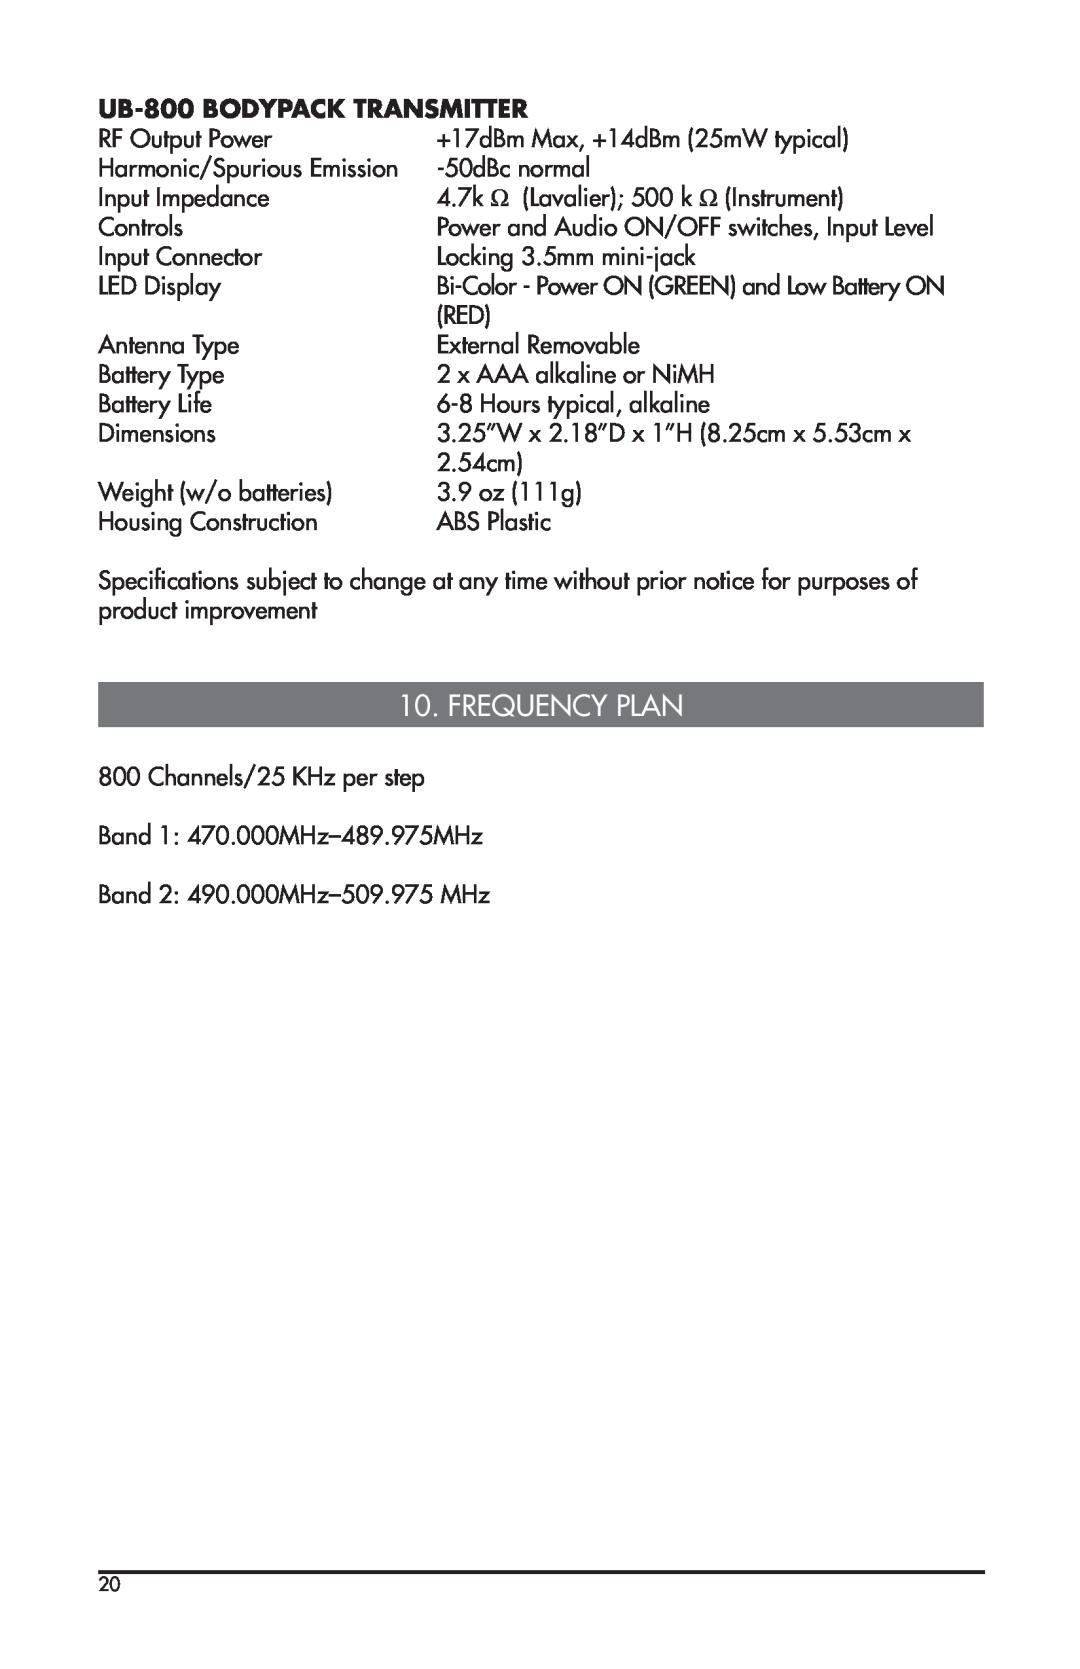 Nady Systems U-800 owner manual Frequency Plan, UB-800BODYPACK TRANSMITTER 